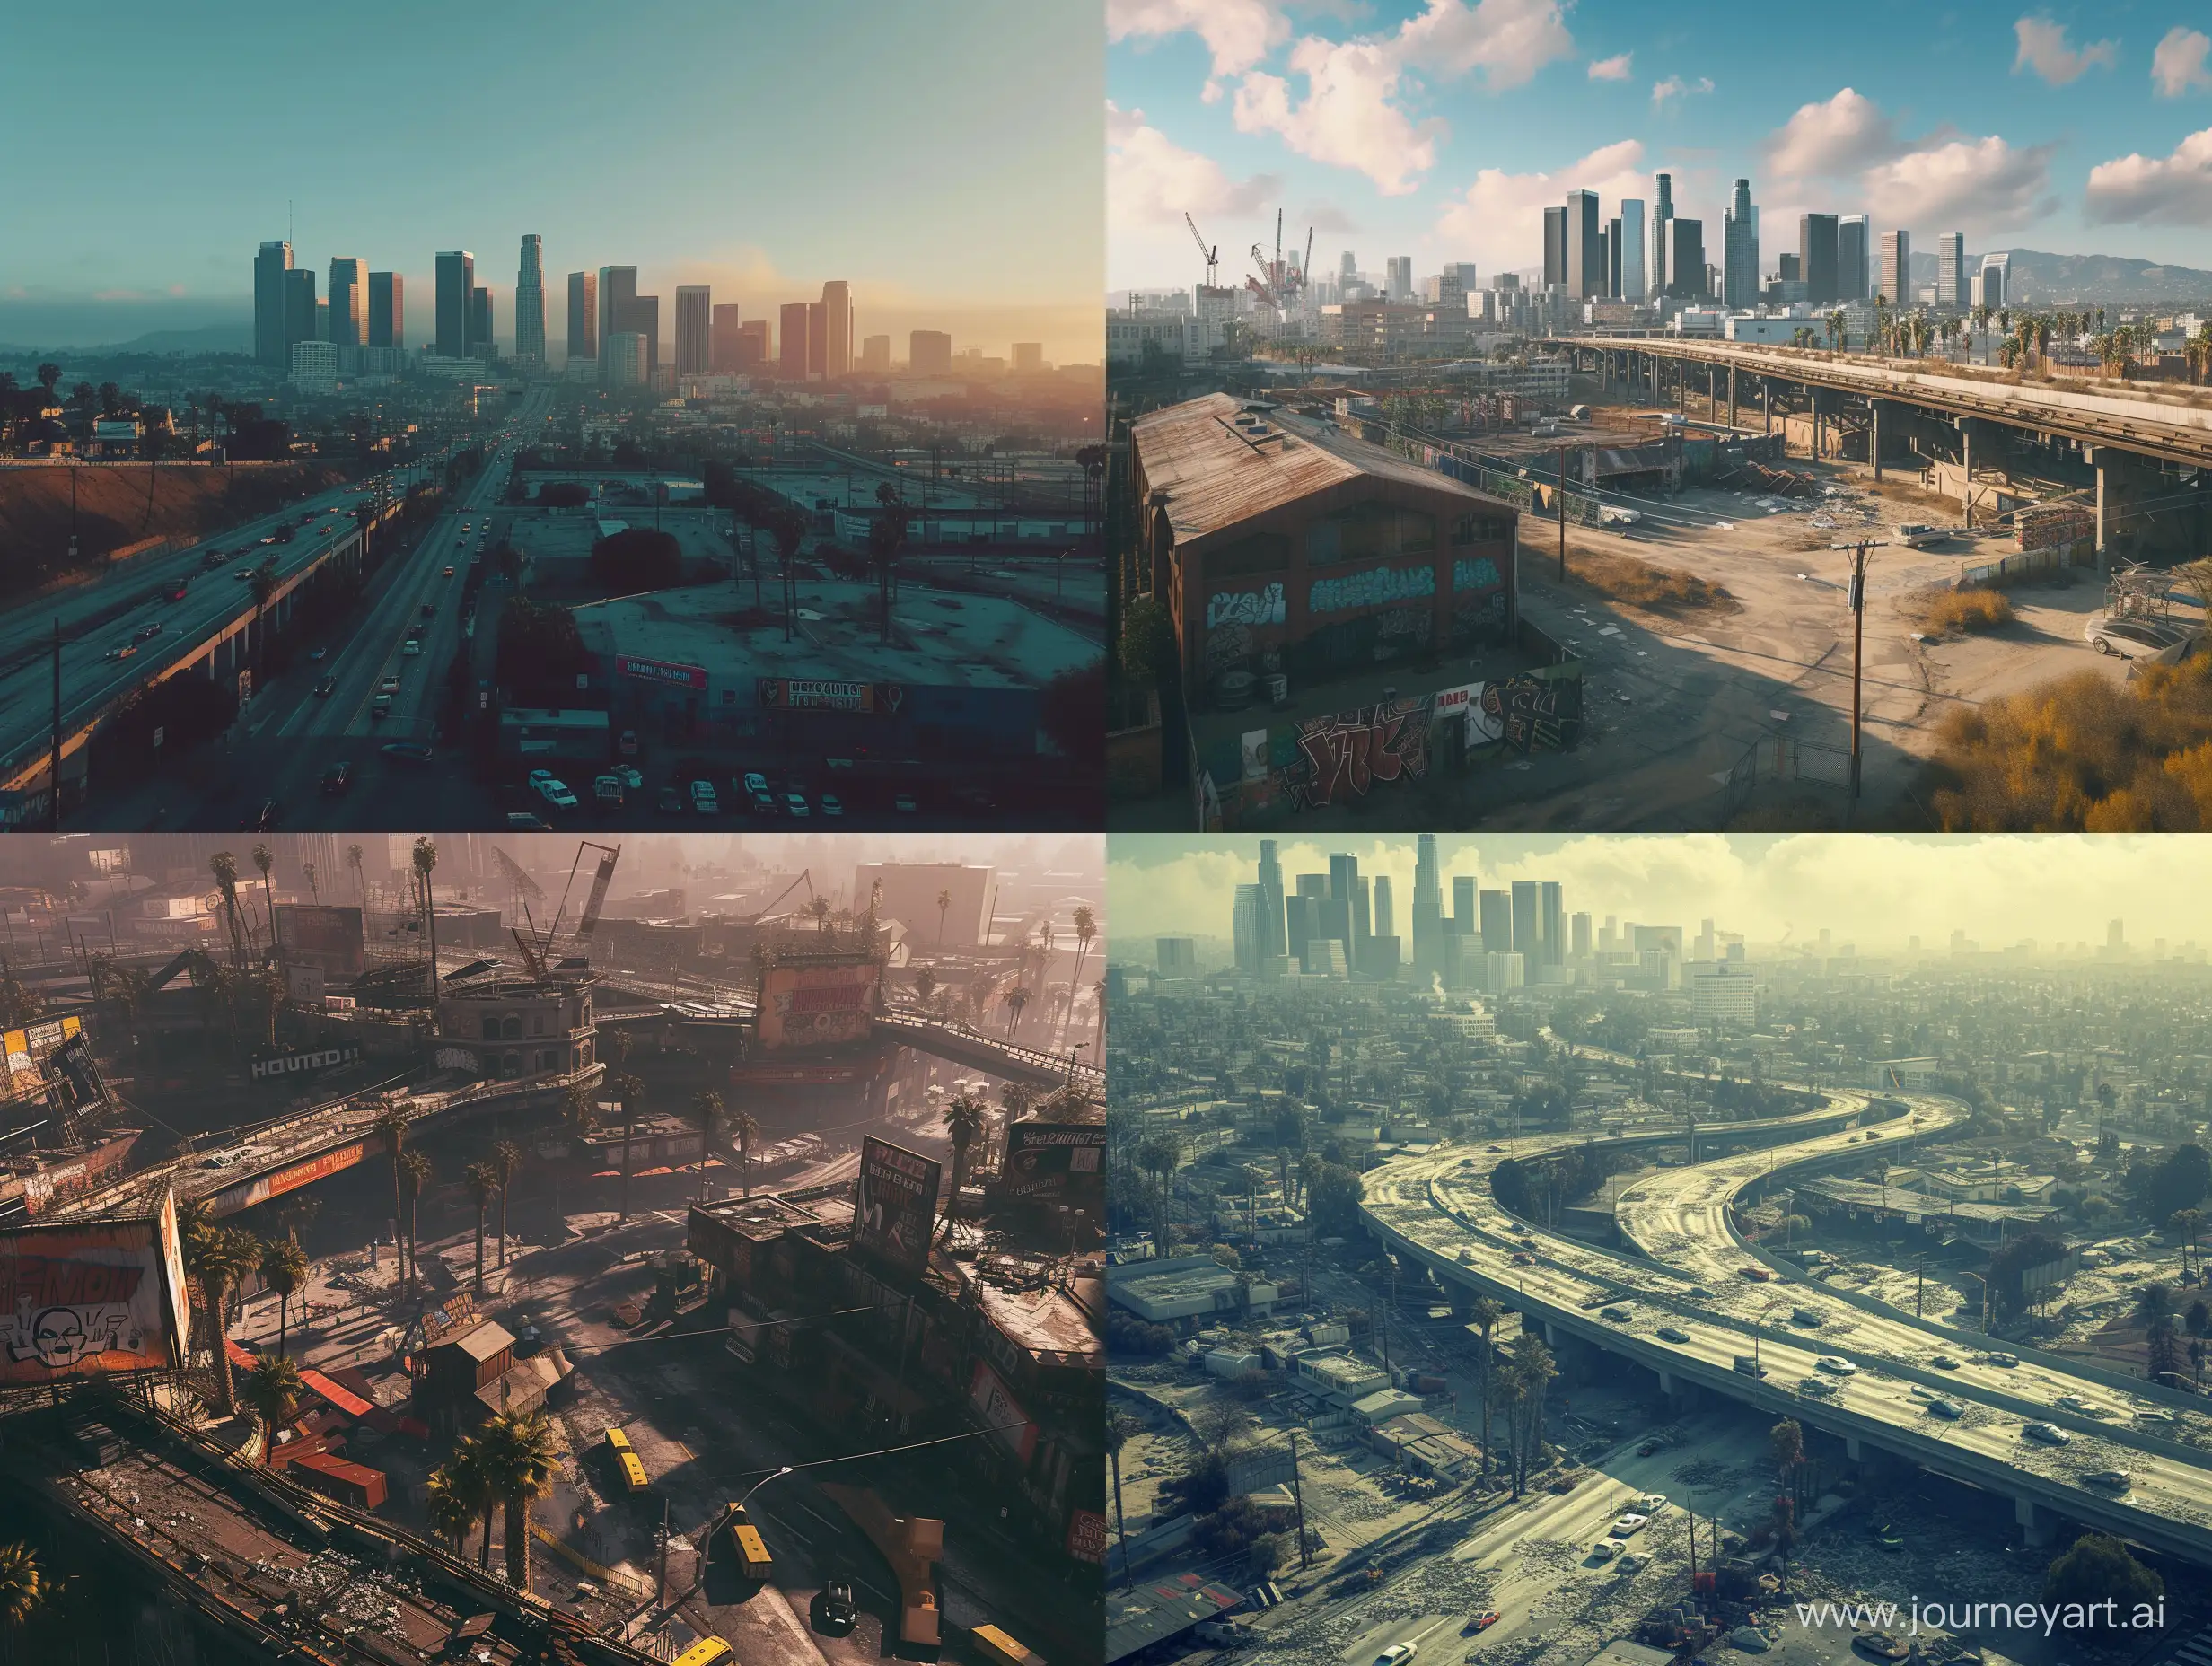 a bustling large Procedural los Angeles city, the photo is bathed in natural lighting, relaxing time setting, creative creative architectures, drone view, skyline, environment, style raw ,photograph, detailed. landscape, phone photo, dystopian
